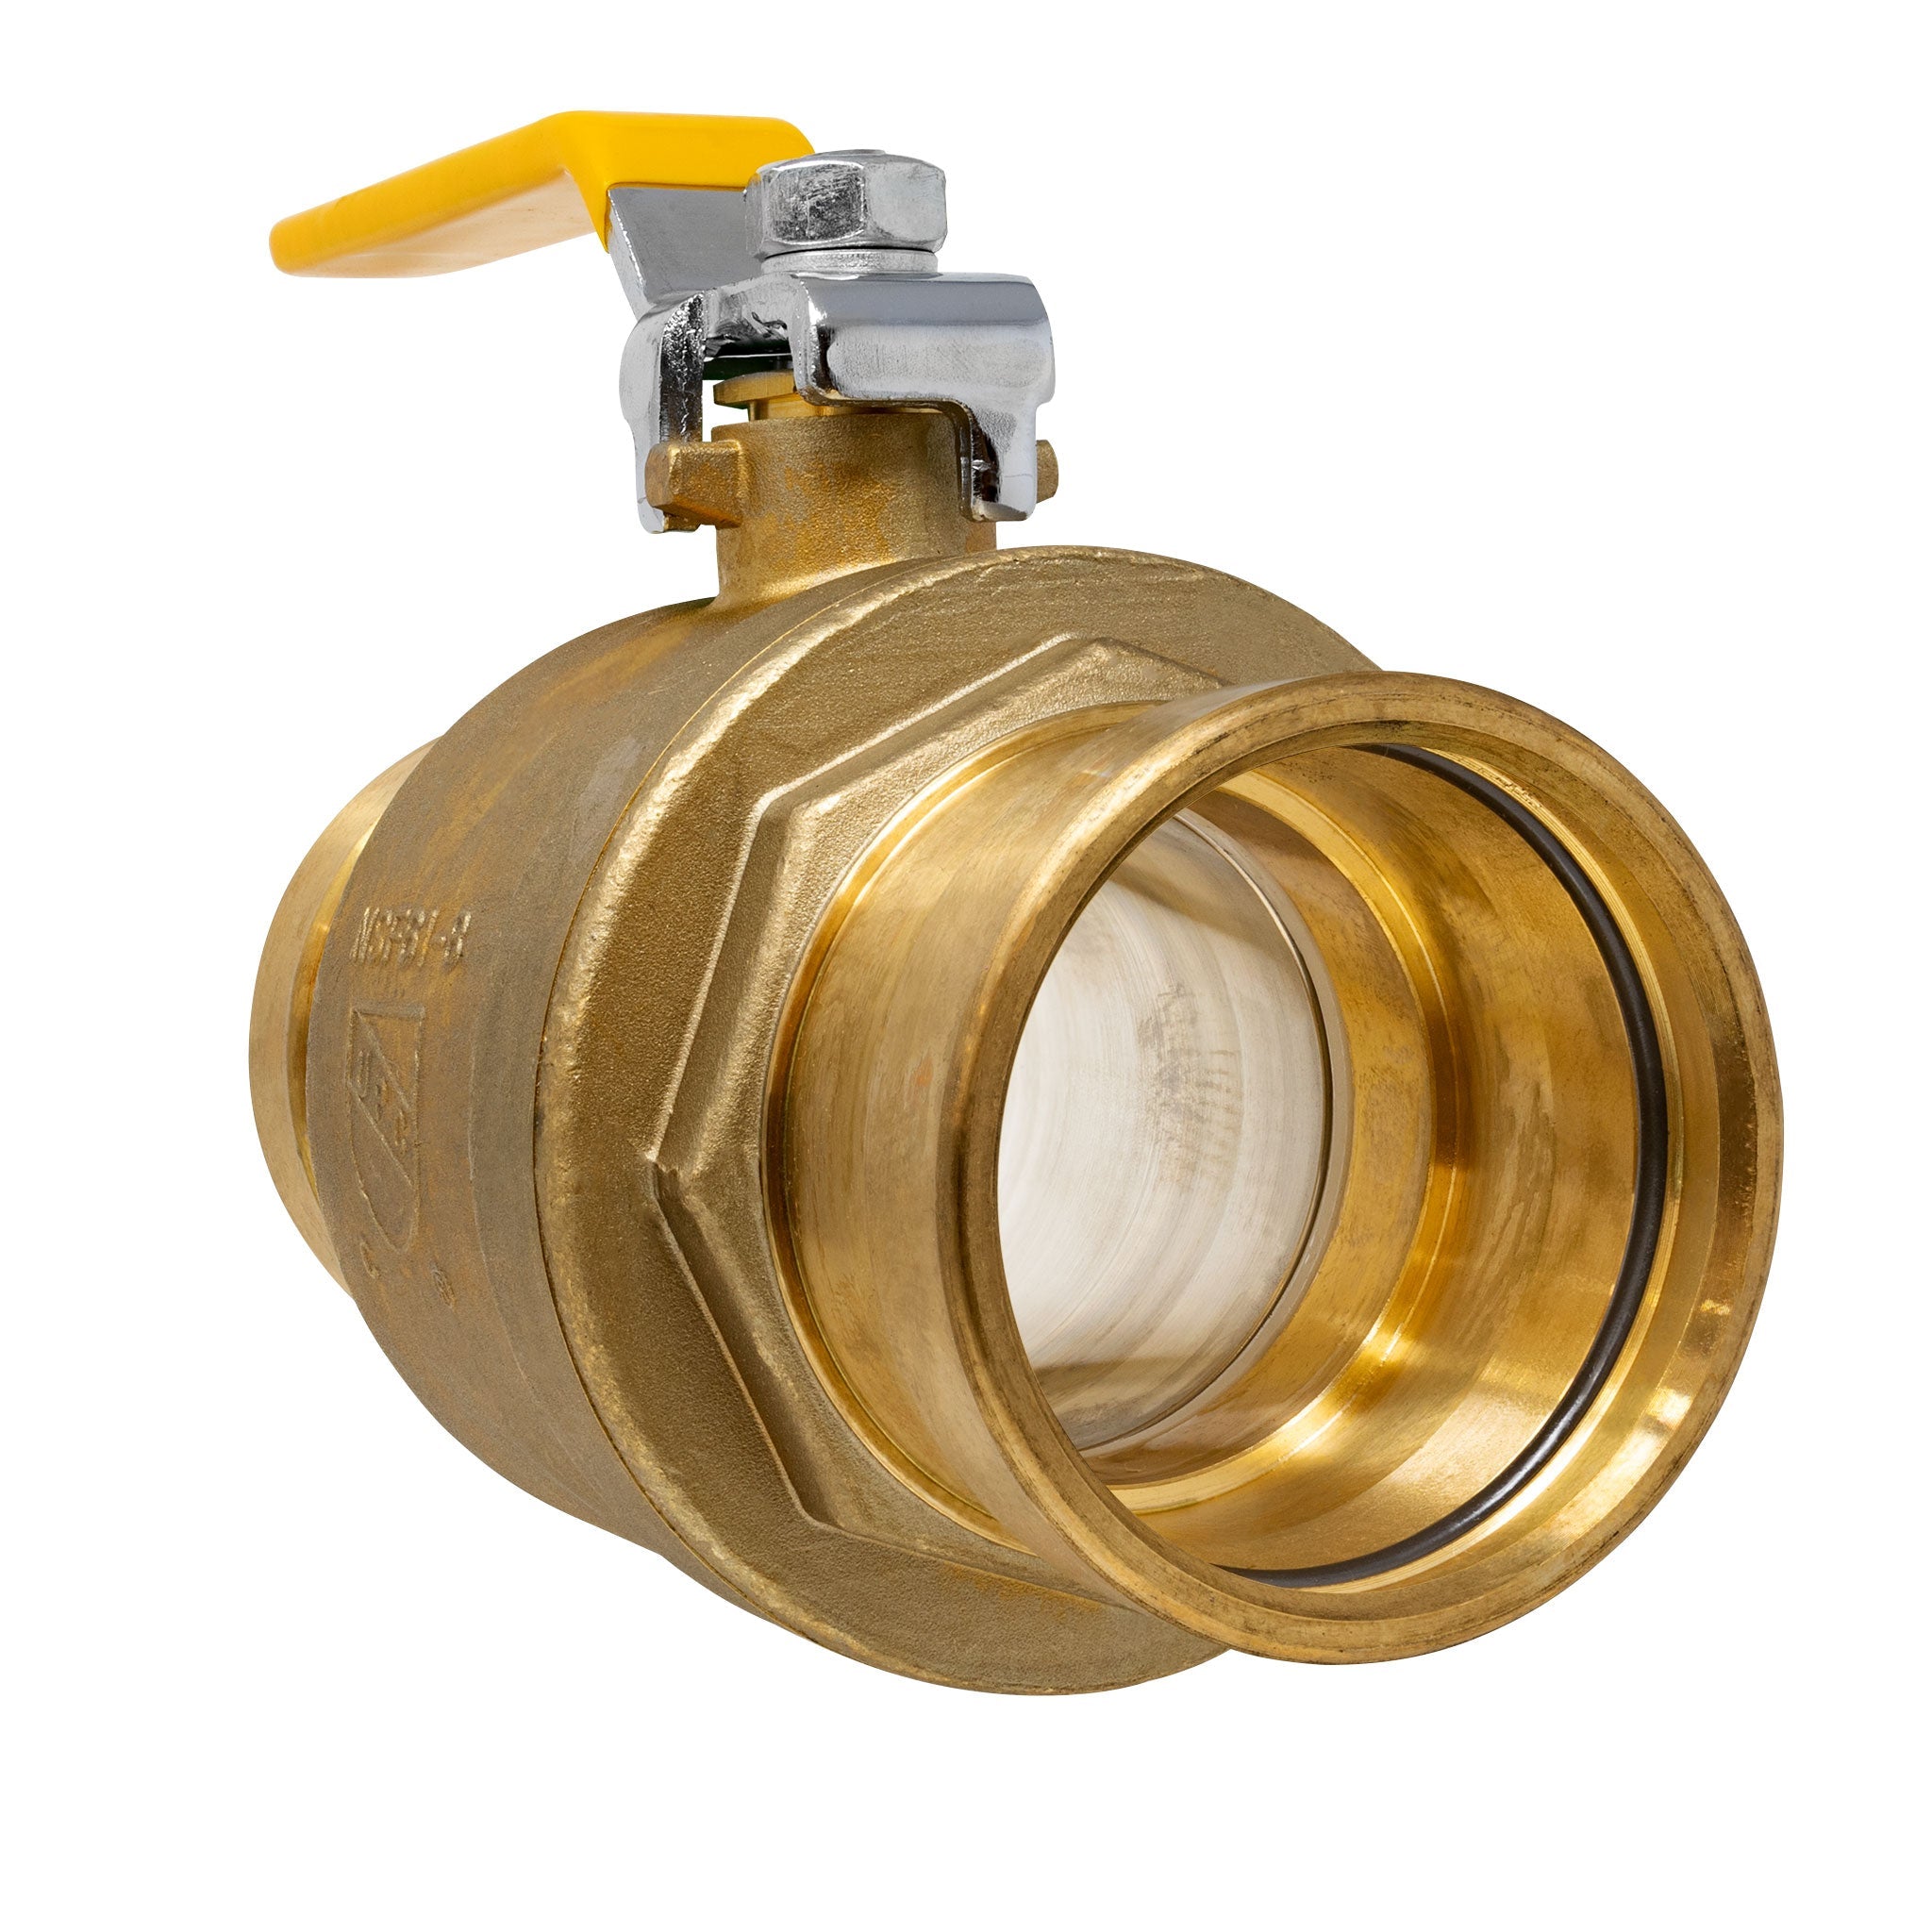 3" Press Ends Full Port Ball Valve Lead Free. ProPress Compatible.